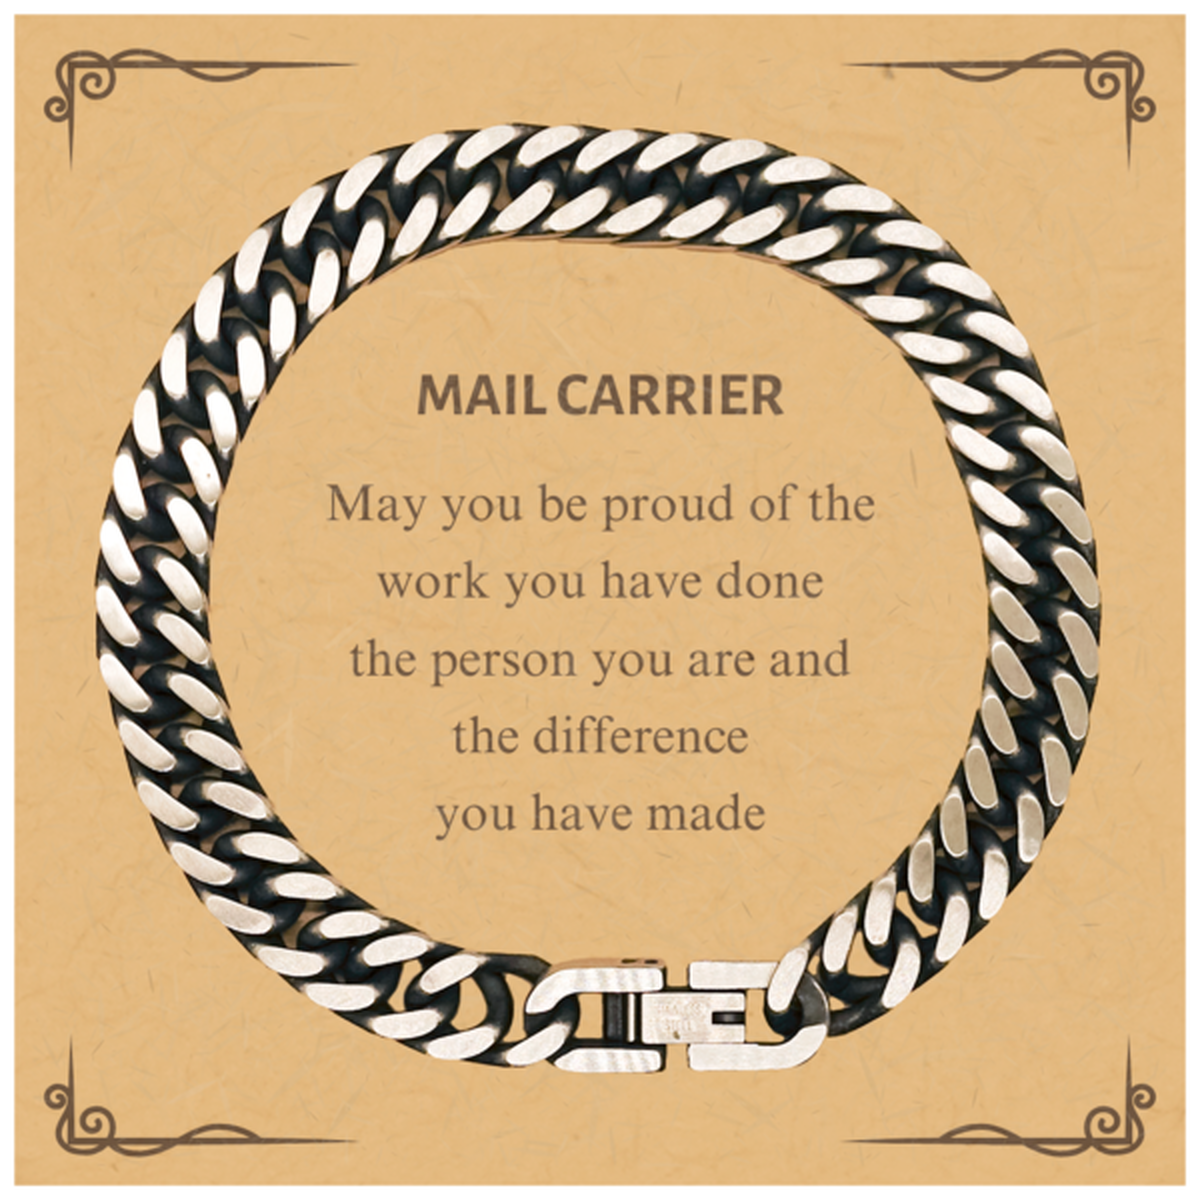 Mail Carrier May you be proud of the work you have done, Retirement Mail Carrier Cuban Link Chain Bracelet for Colleague Appreciation Gifts Amazing for Mail Carrier